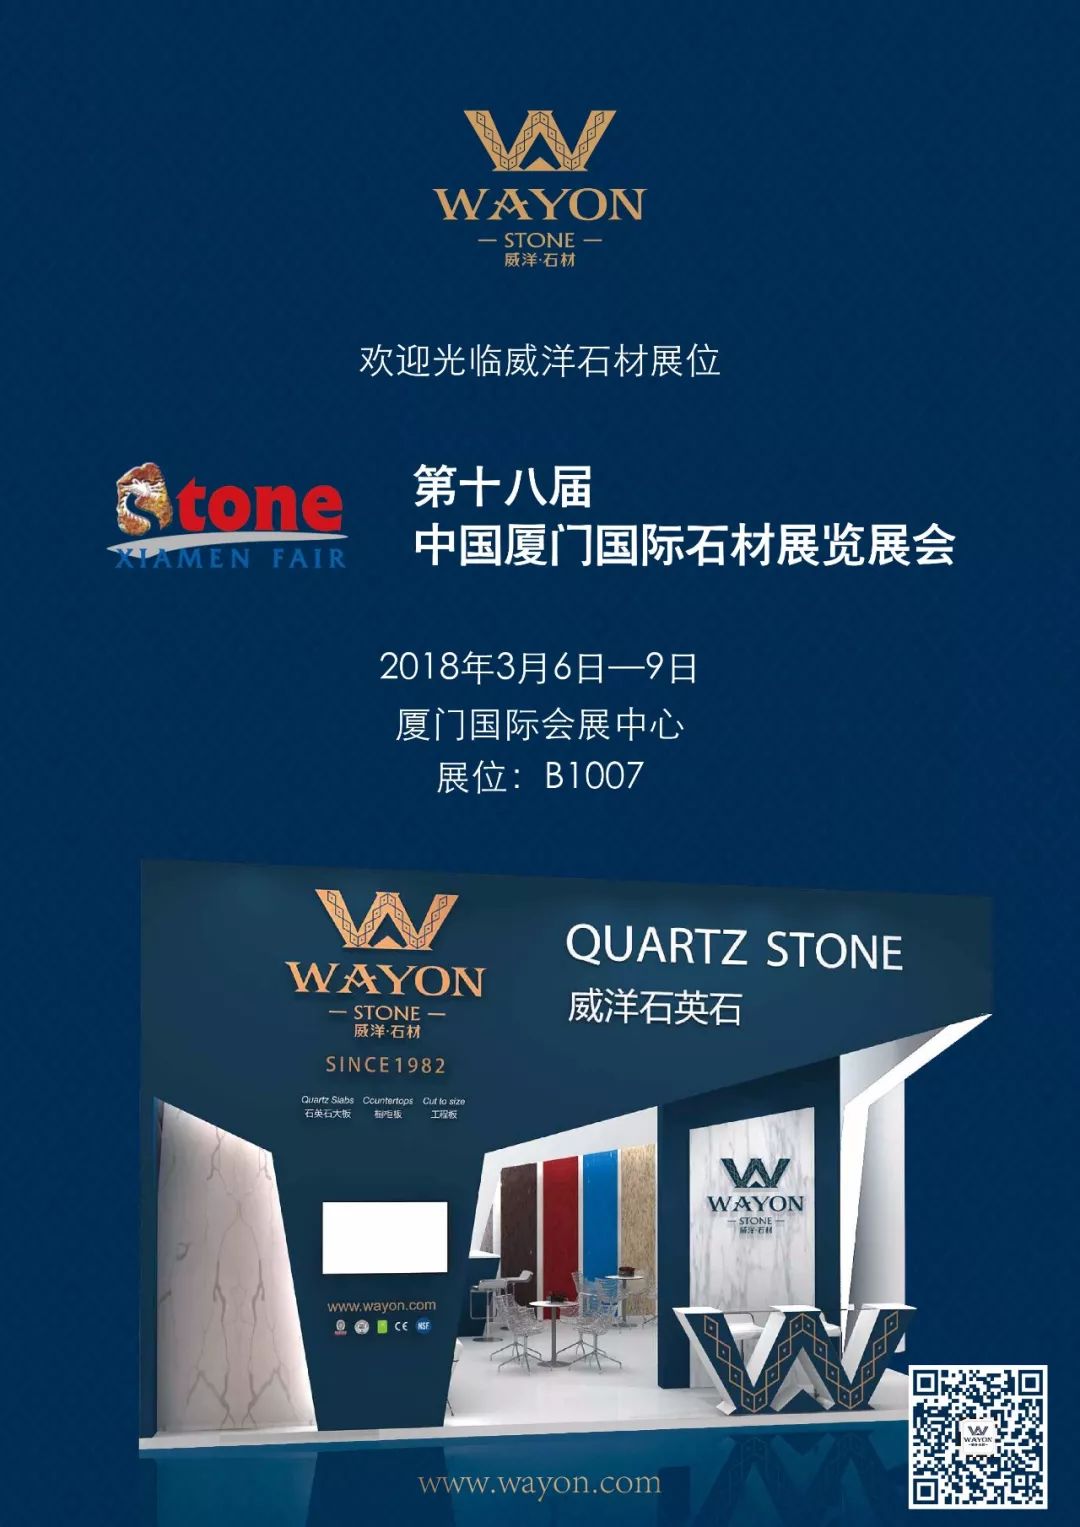 News | Welcome to Wayon Stone's booth in Verona, Italy